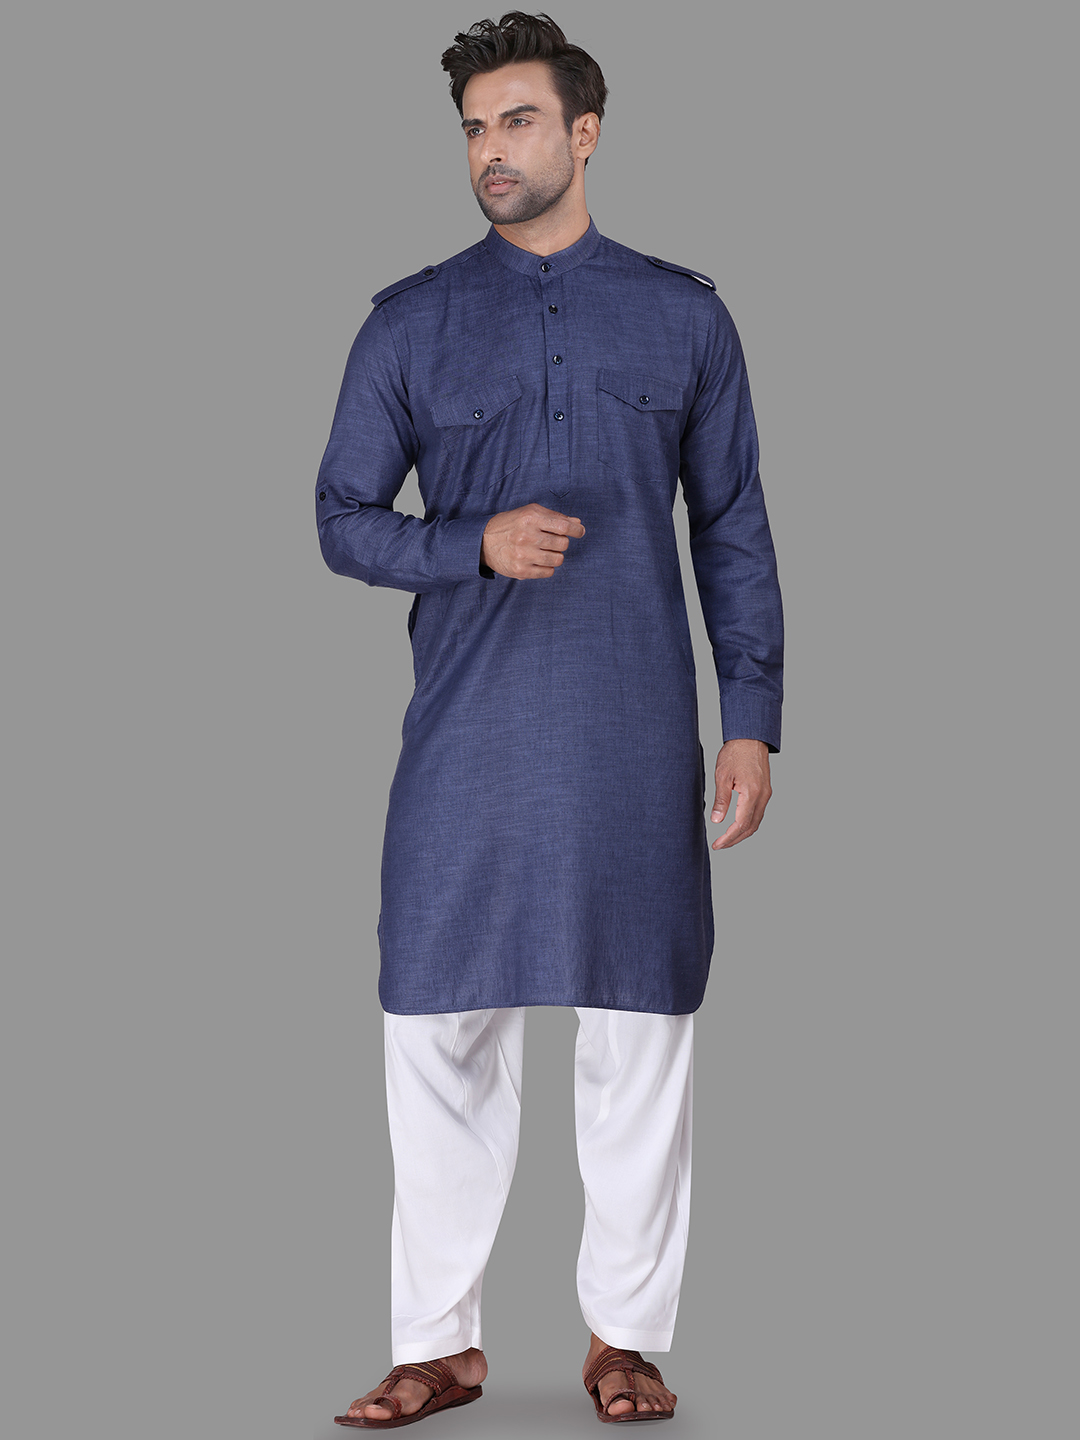 Classic royal blue pathani suit for men - G3-MPS0552 | G3nxt.com